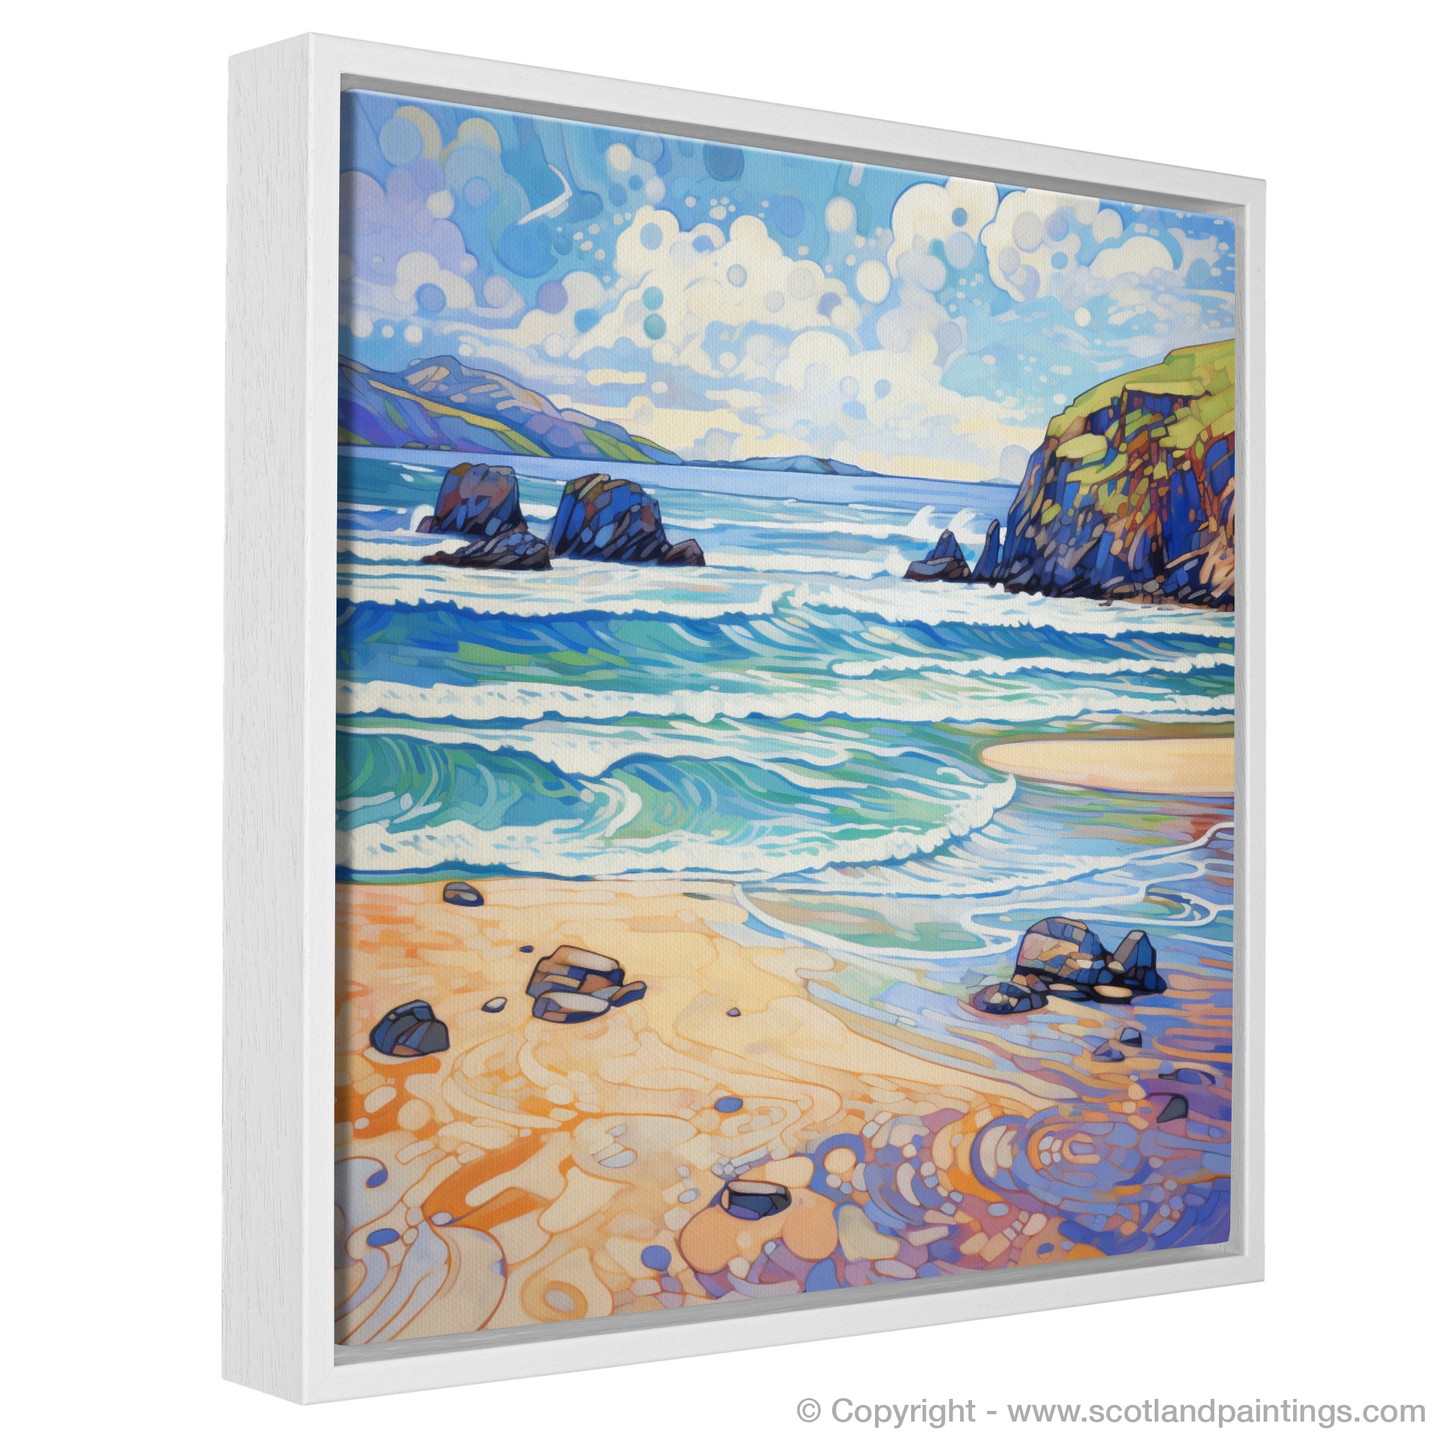 Painting and Art Print of Durness Beach, Sutherland in summer entitled "Summer Serenade at Durness Beach".